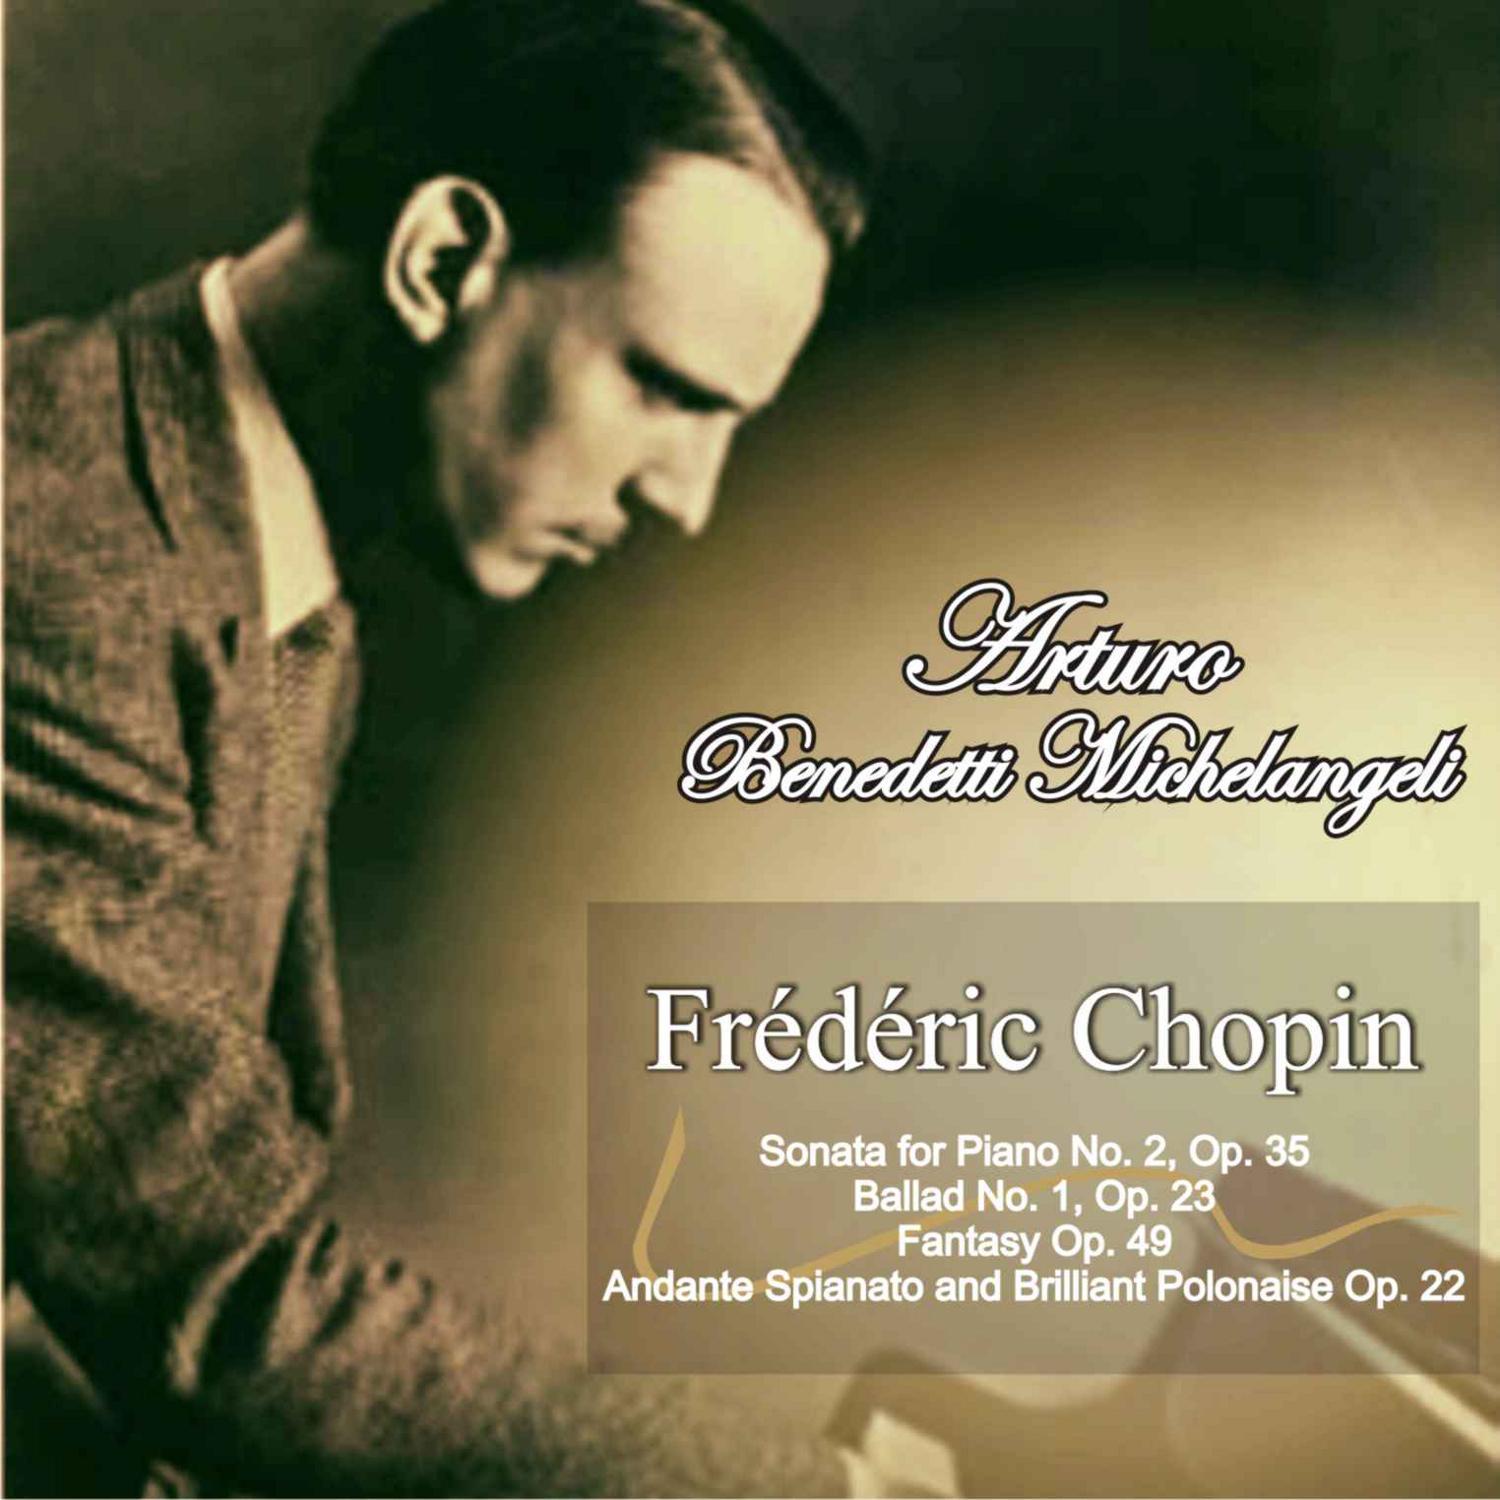 Frédéric Chopin: Sonata for Piano No. 2 in B-Flat Minor Op. 35 - Ballad No. 1 in G Minor, Op. 23 - Fantasy in F Minor and A-Flat Major, Op. 49 - Andante Spianato and Brilliant Polonaise in E-Flat Major, Op. 22